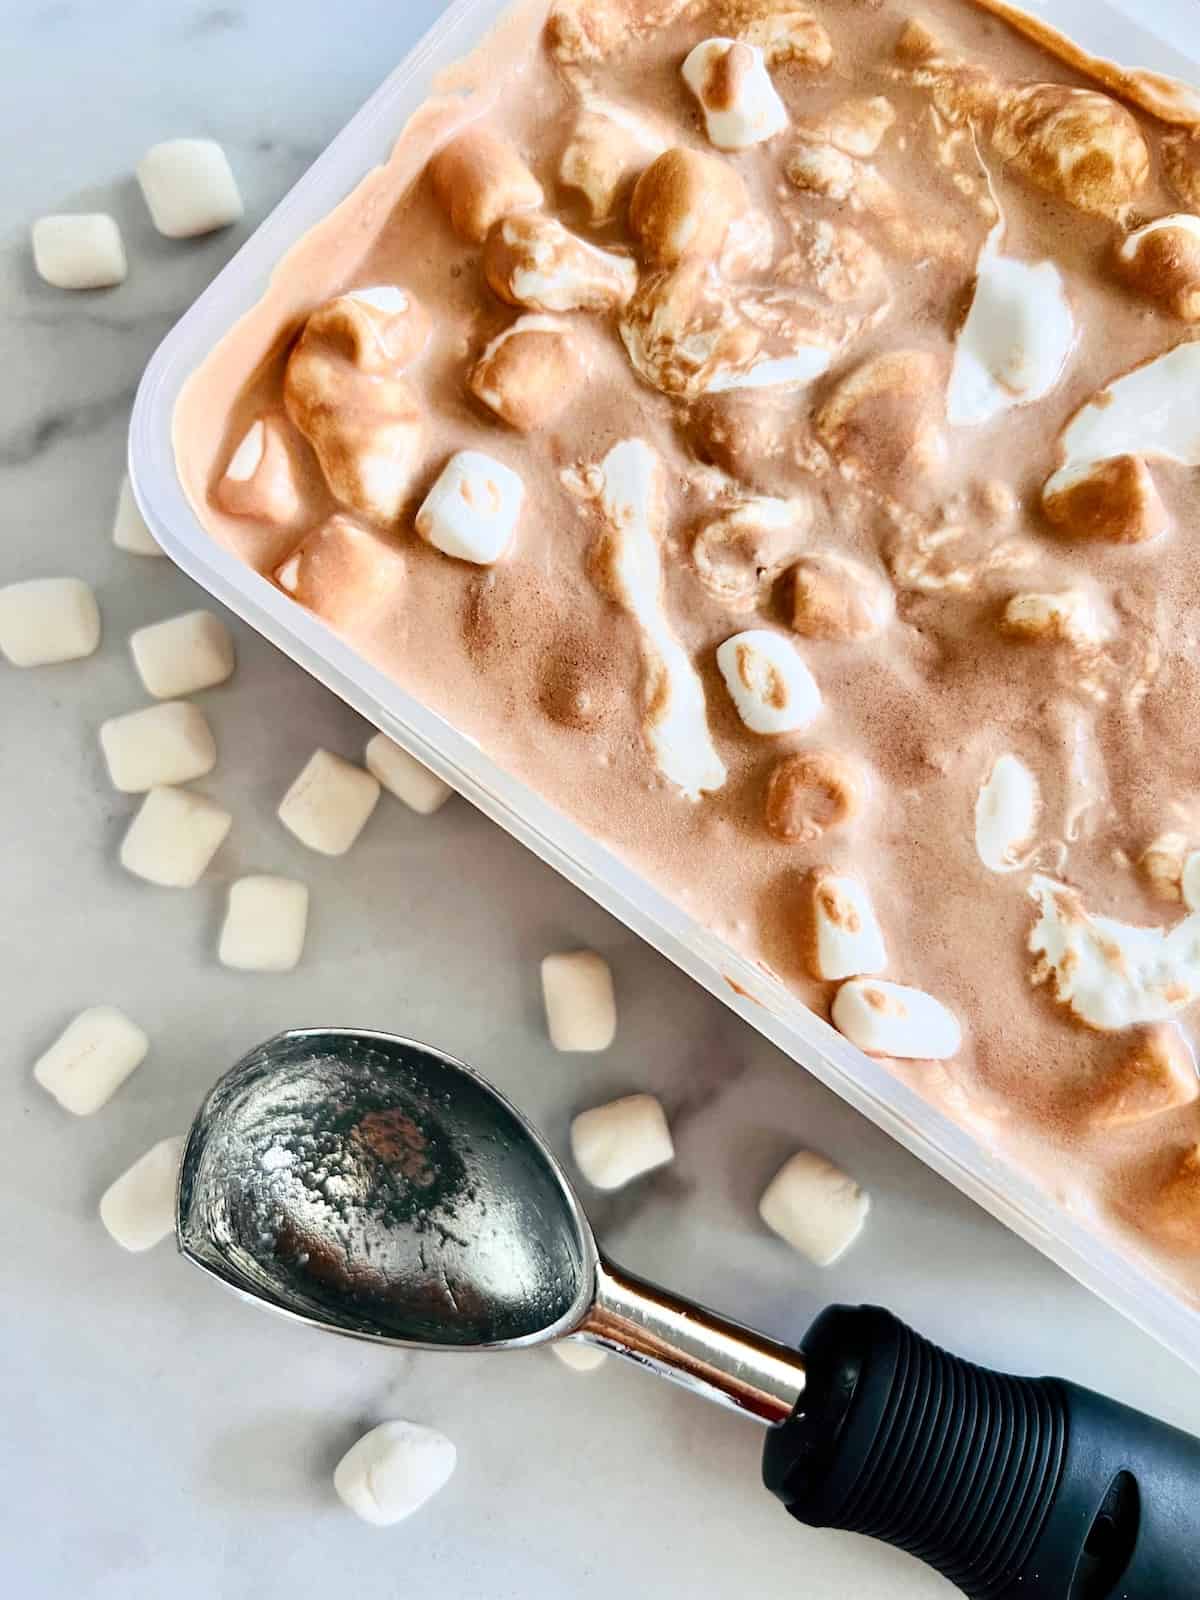 Chocolate Marshmallow Ice Cream Frozen in the container with an ice cream scoop and marshmallows on the counter.